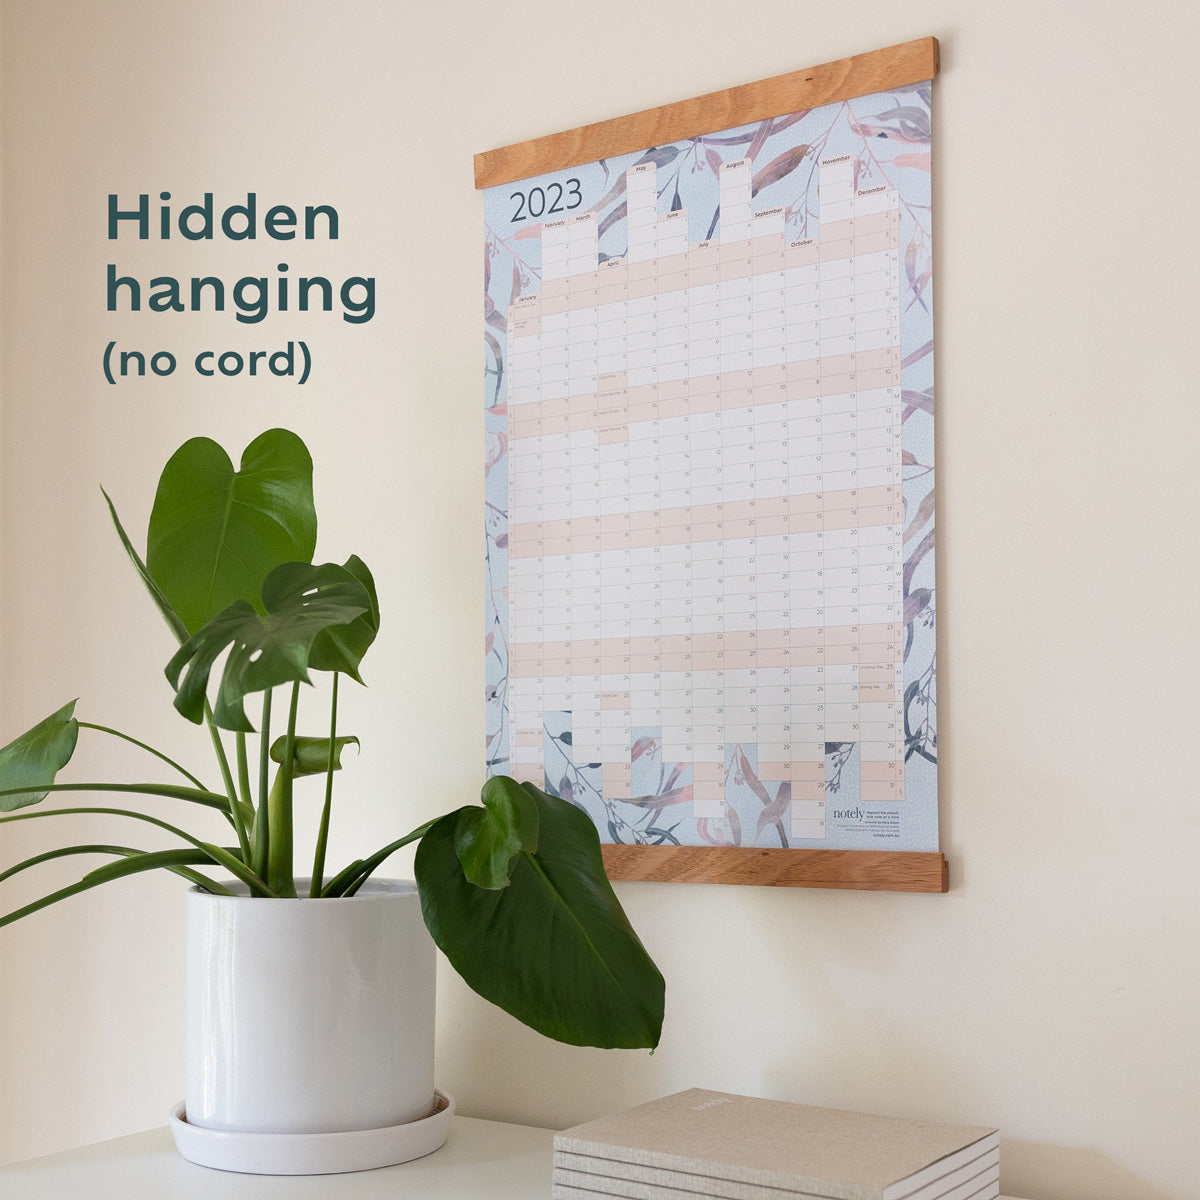 Hidden hanging for your wall planner to have a seamless finish